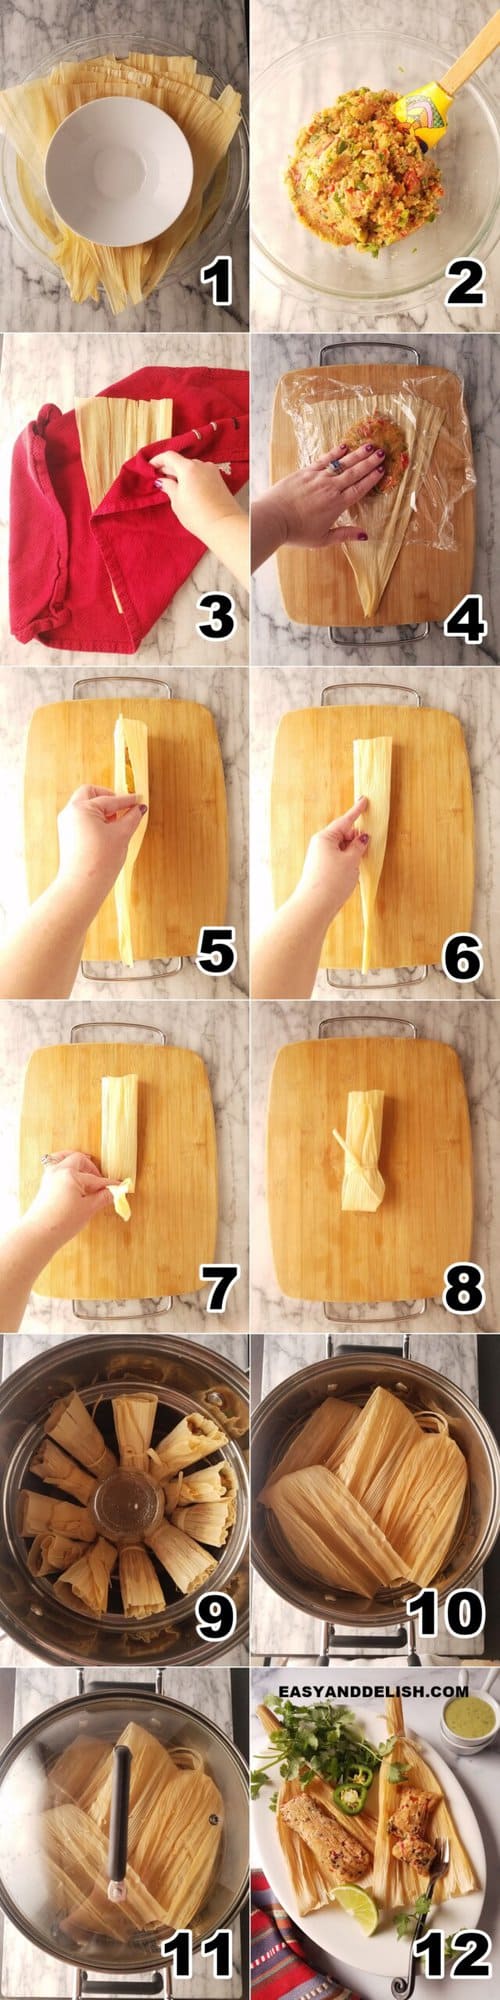 step by step instructions.